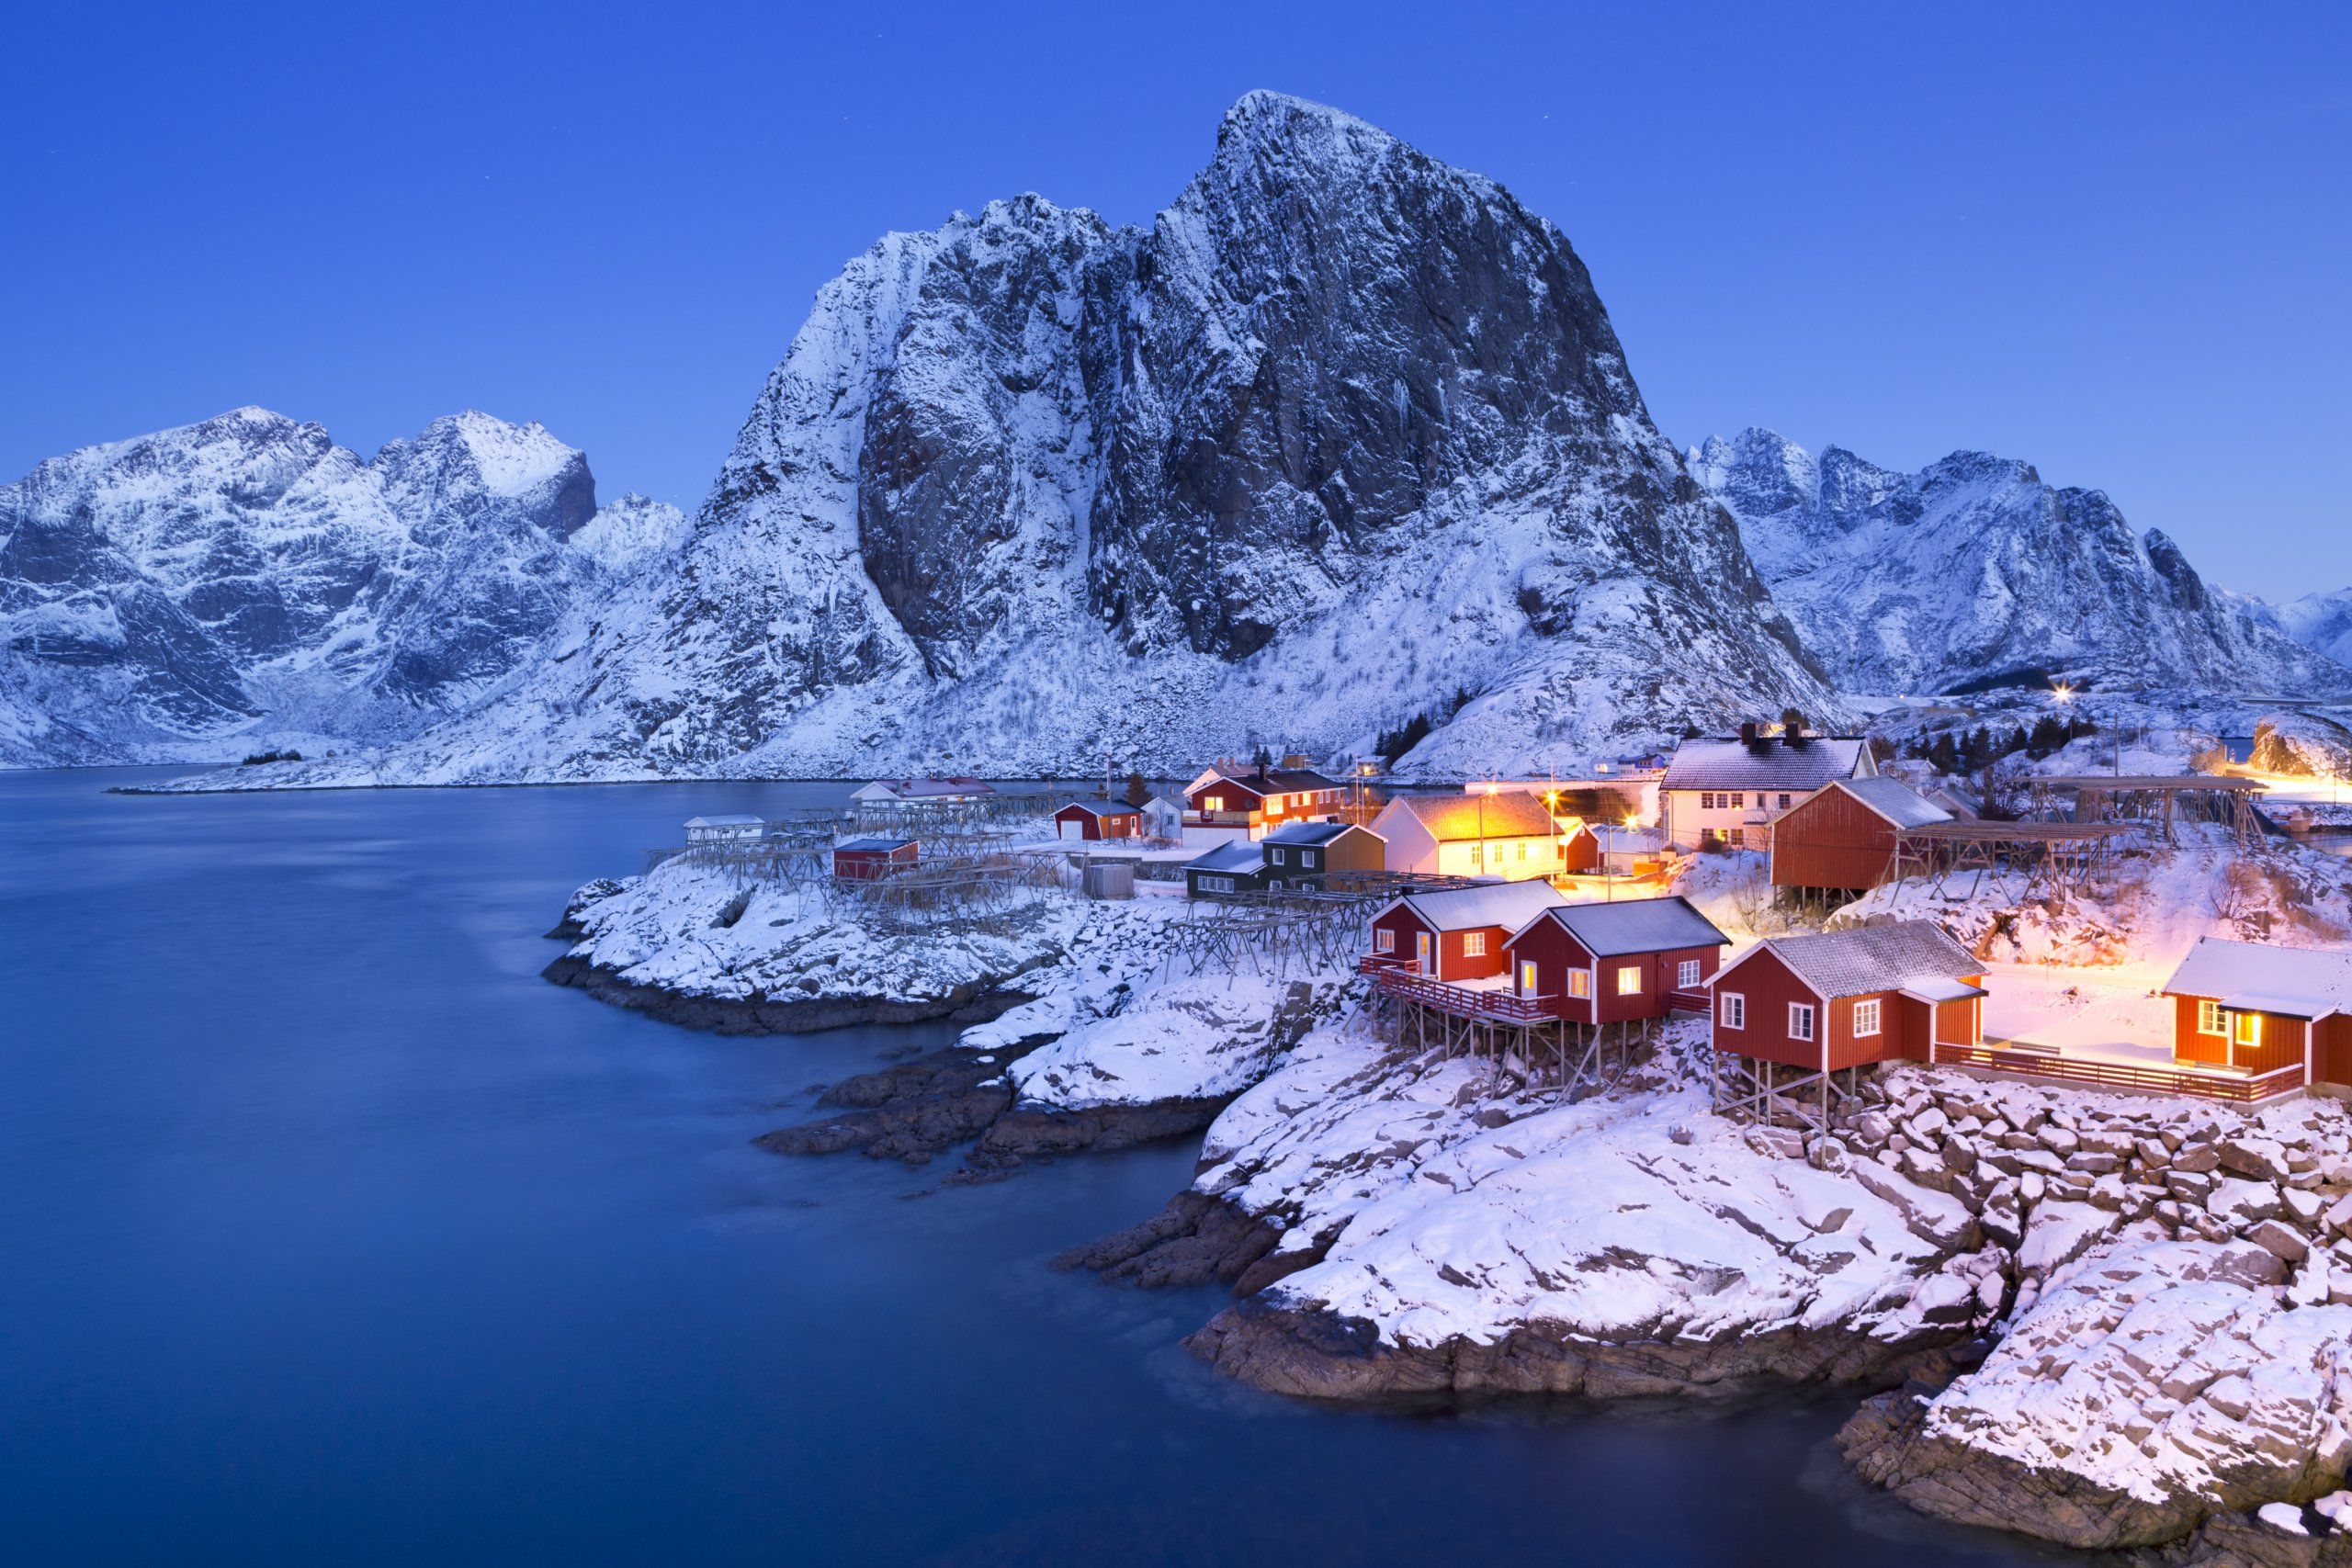 Fisherman's cabins perched on the shore in Lofoten at dusk, with snowy peaks in the background